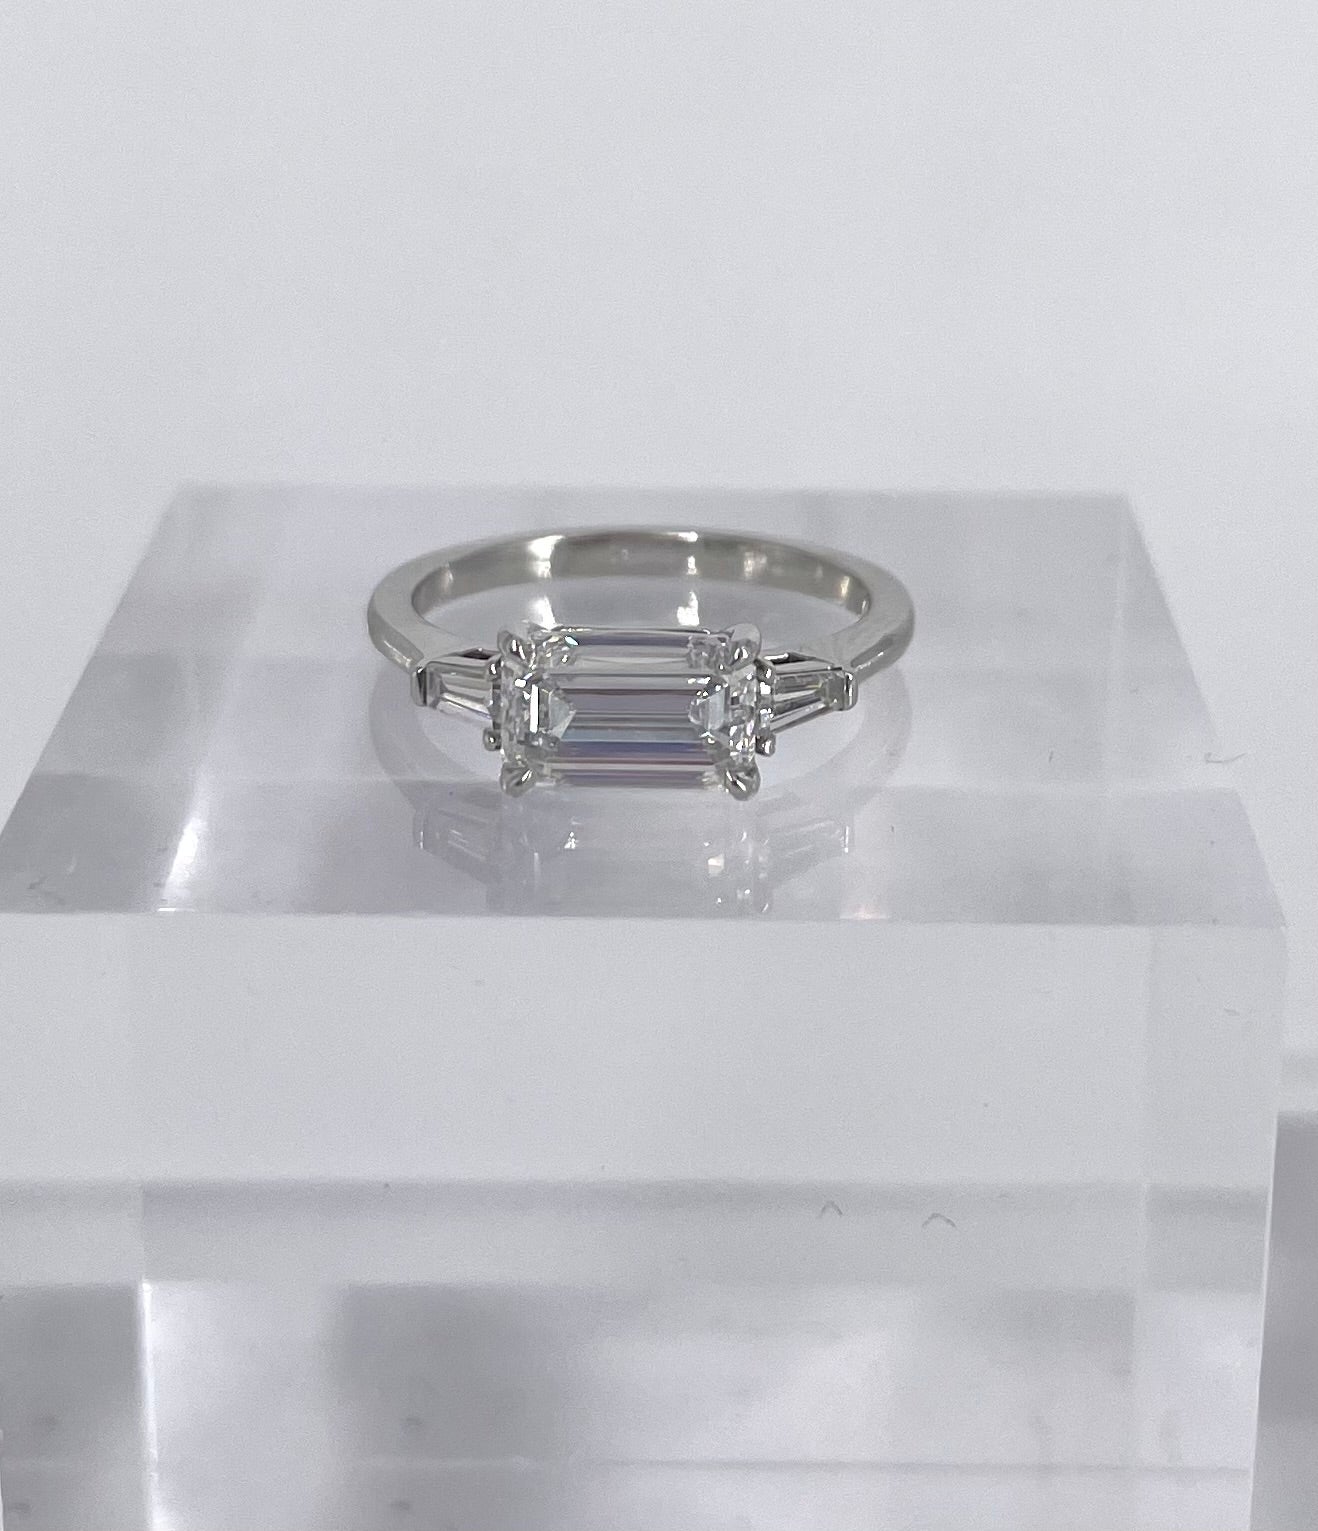 This unique and sophisticated ring from the J. Birnbach workshop is perfect for someone looking for a fresh take on a timeless style! This very elongated and narrow 1.51 carat emerald cut is perfect for an east-west setting. The diamond has been